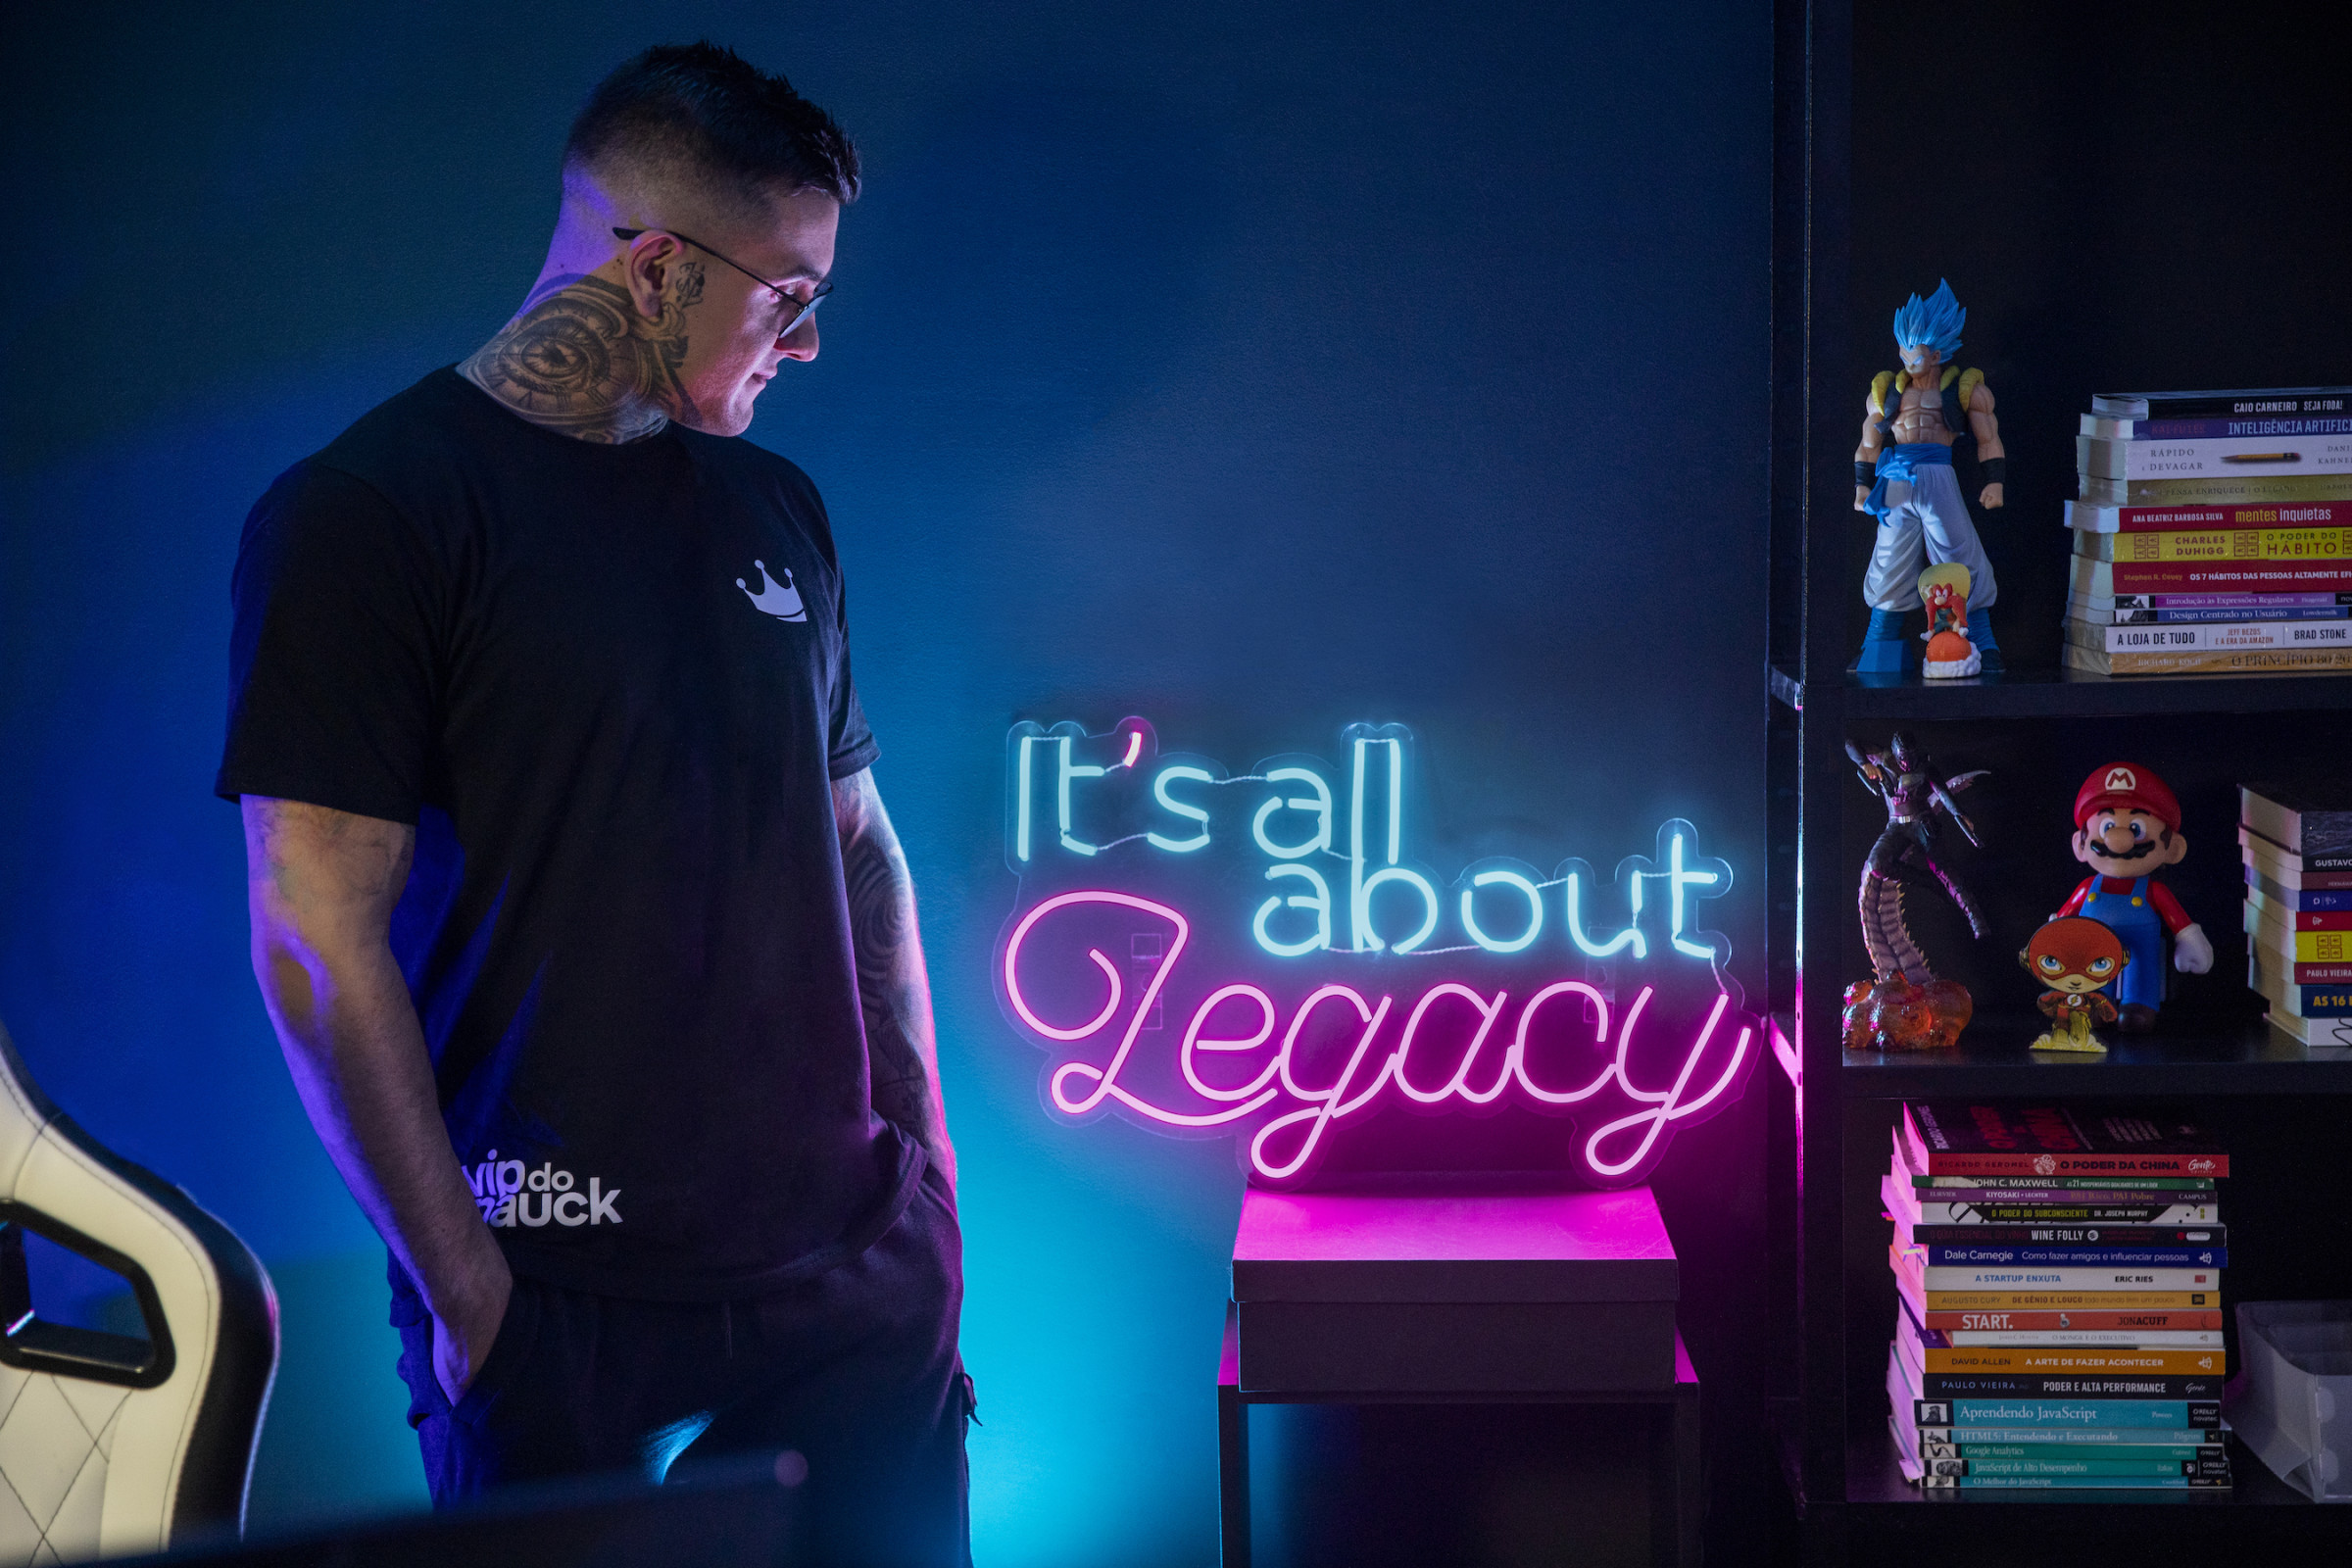 Author Pedro gazing at a blue-and-pink neon sign that says "It's all about legacy"